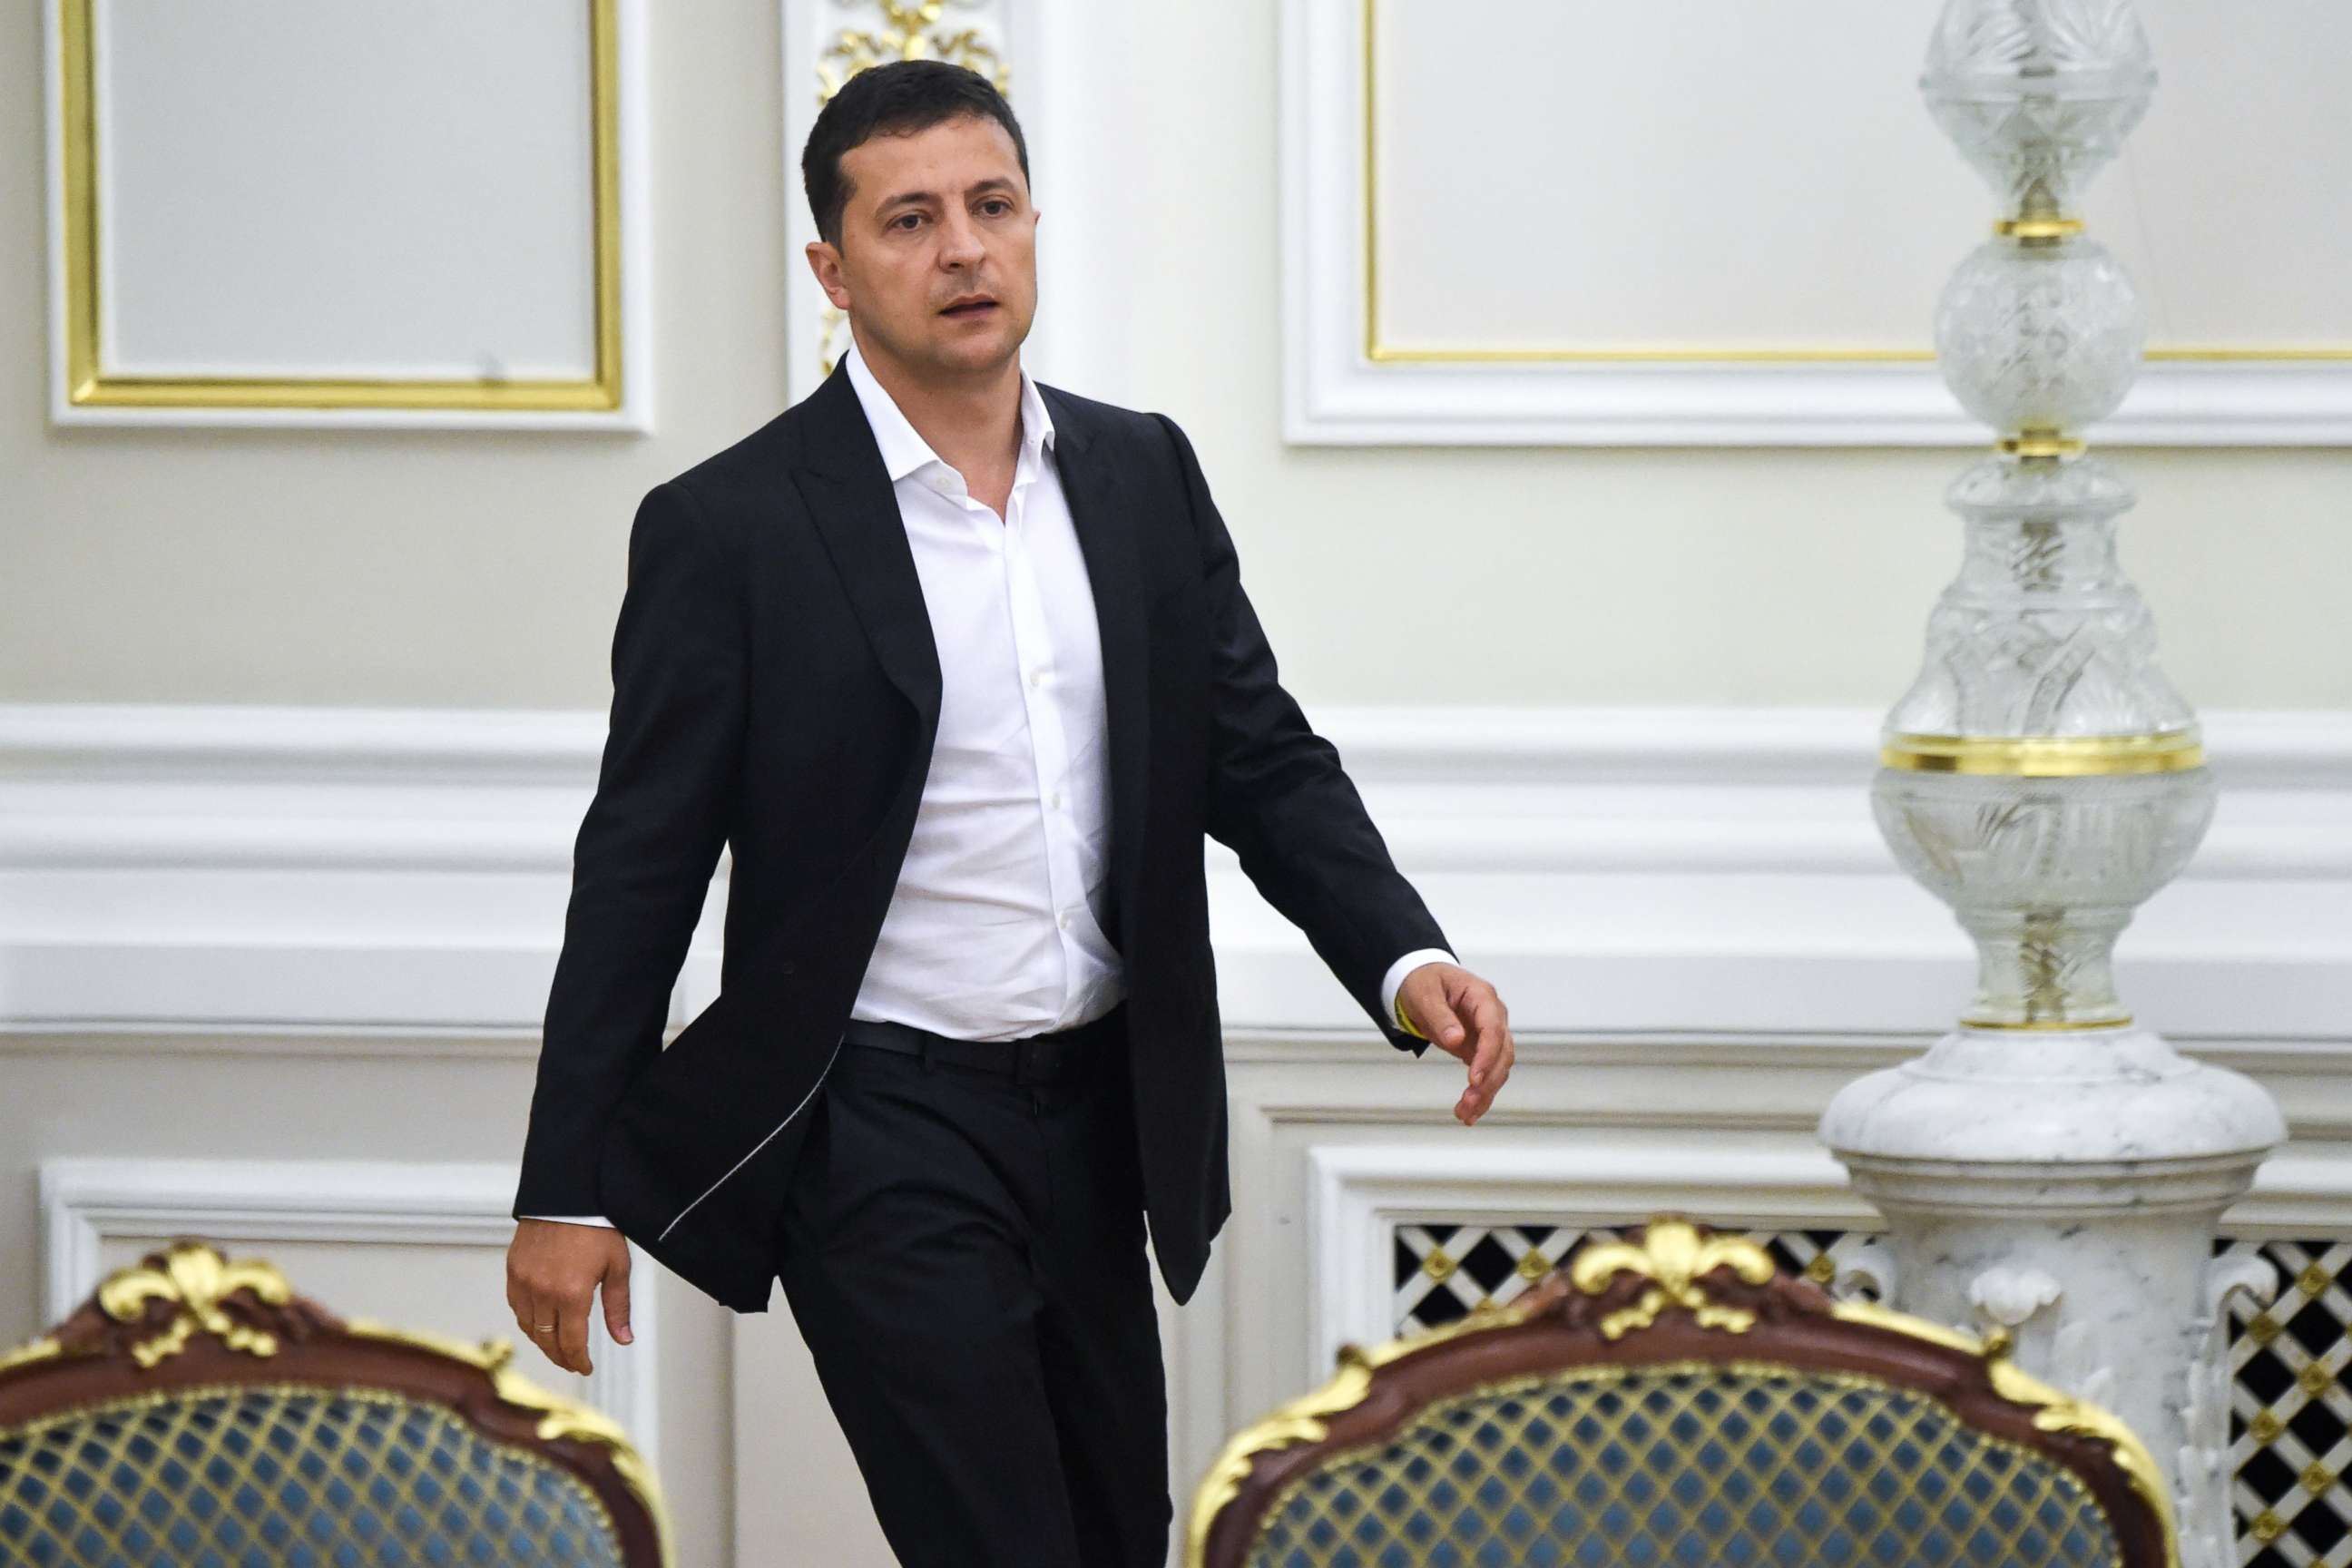 PHOTO: Ukrainian President Volodymyr Zelensky arrives for a meeting with the new members of the government and new president of Parliament, in Kiev on Sept. 2, 2019.